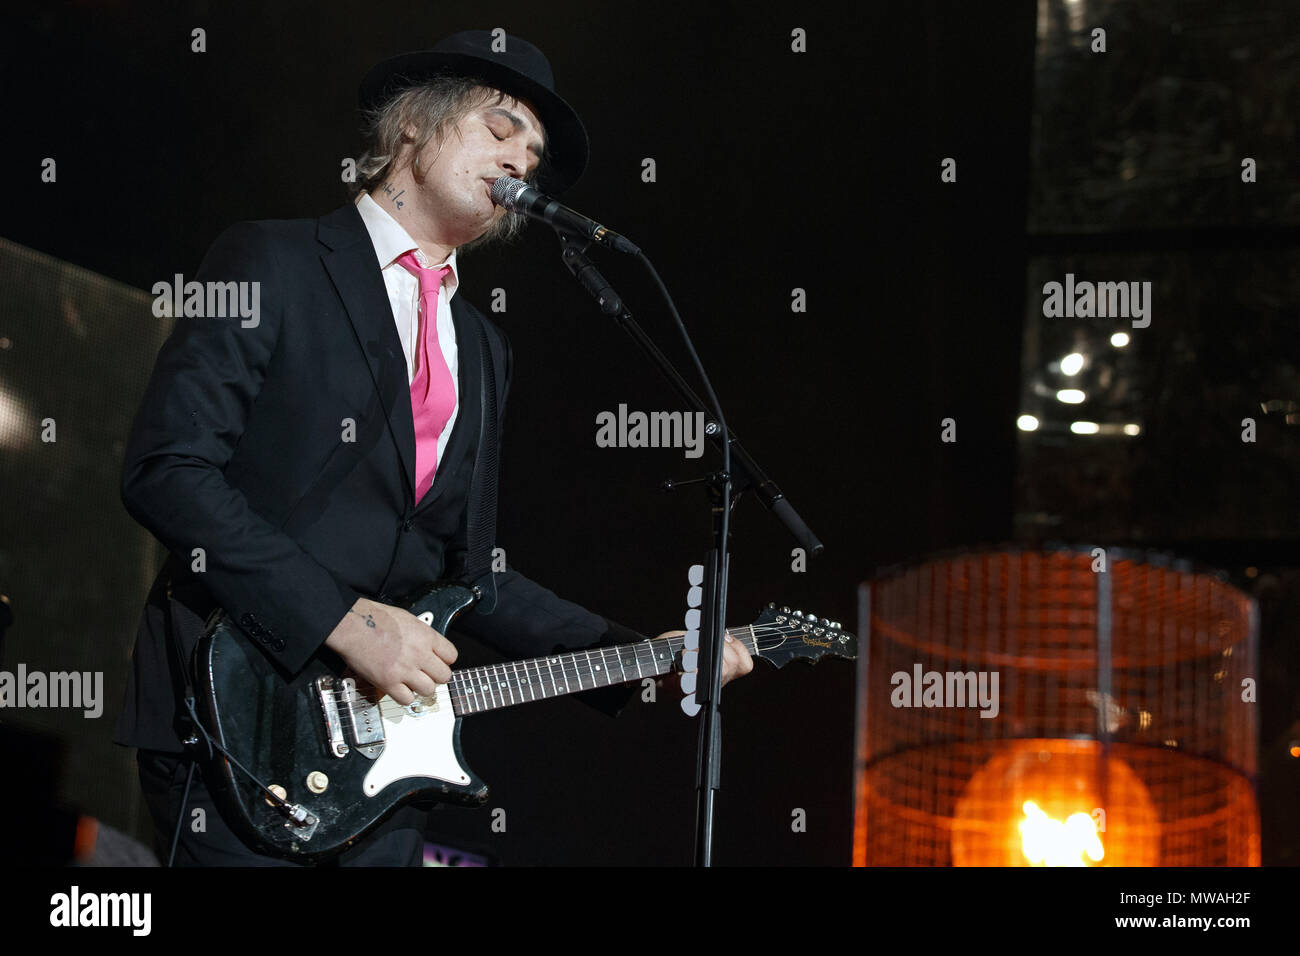 Pete Doherty performing live with The Libertines in Glasgow, Scotland. Peter Doherty, Pete Doherty onstage, Pete Doherty singer, guitar, guitarist. Stock Photo